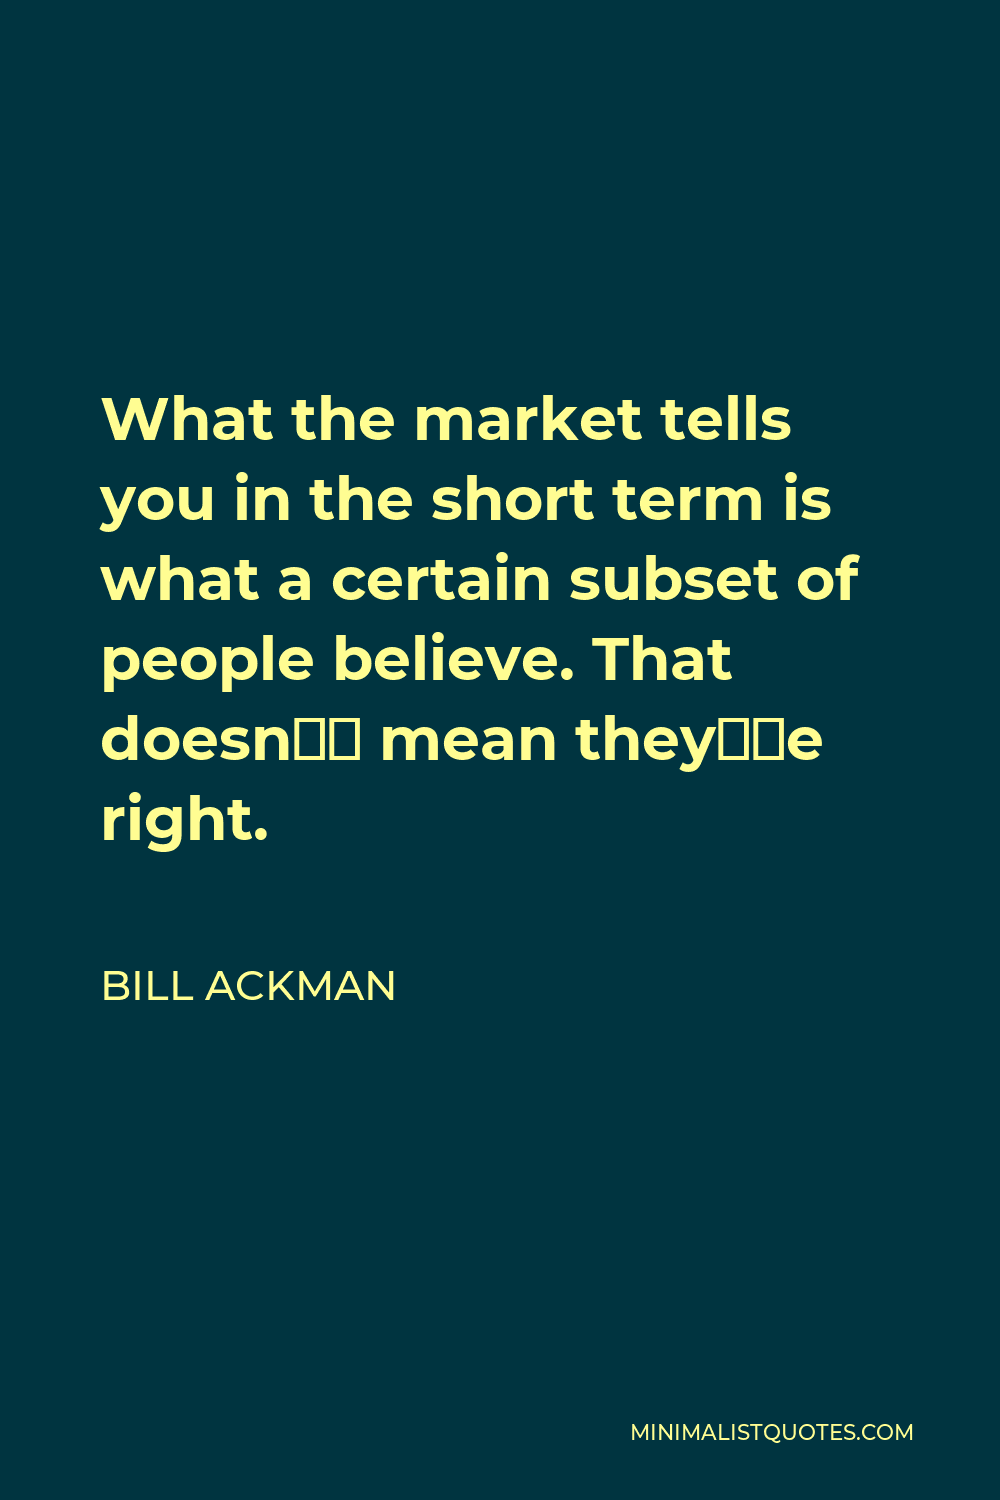 Bill Ackman Quote - What the market tells you in the short term is what a certain subset of people believe. That doesn’t mean they’re right.